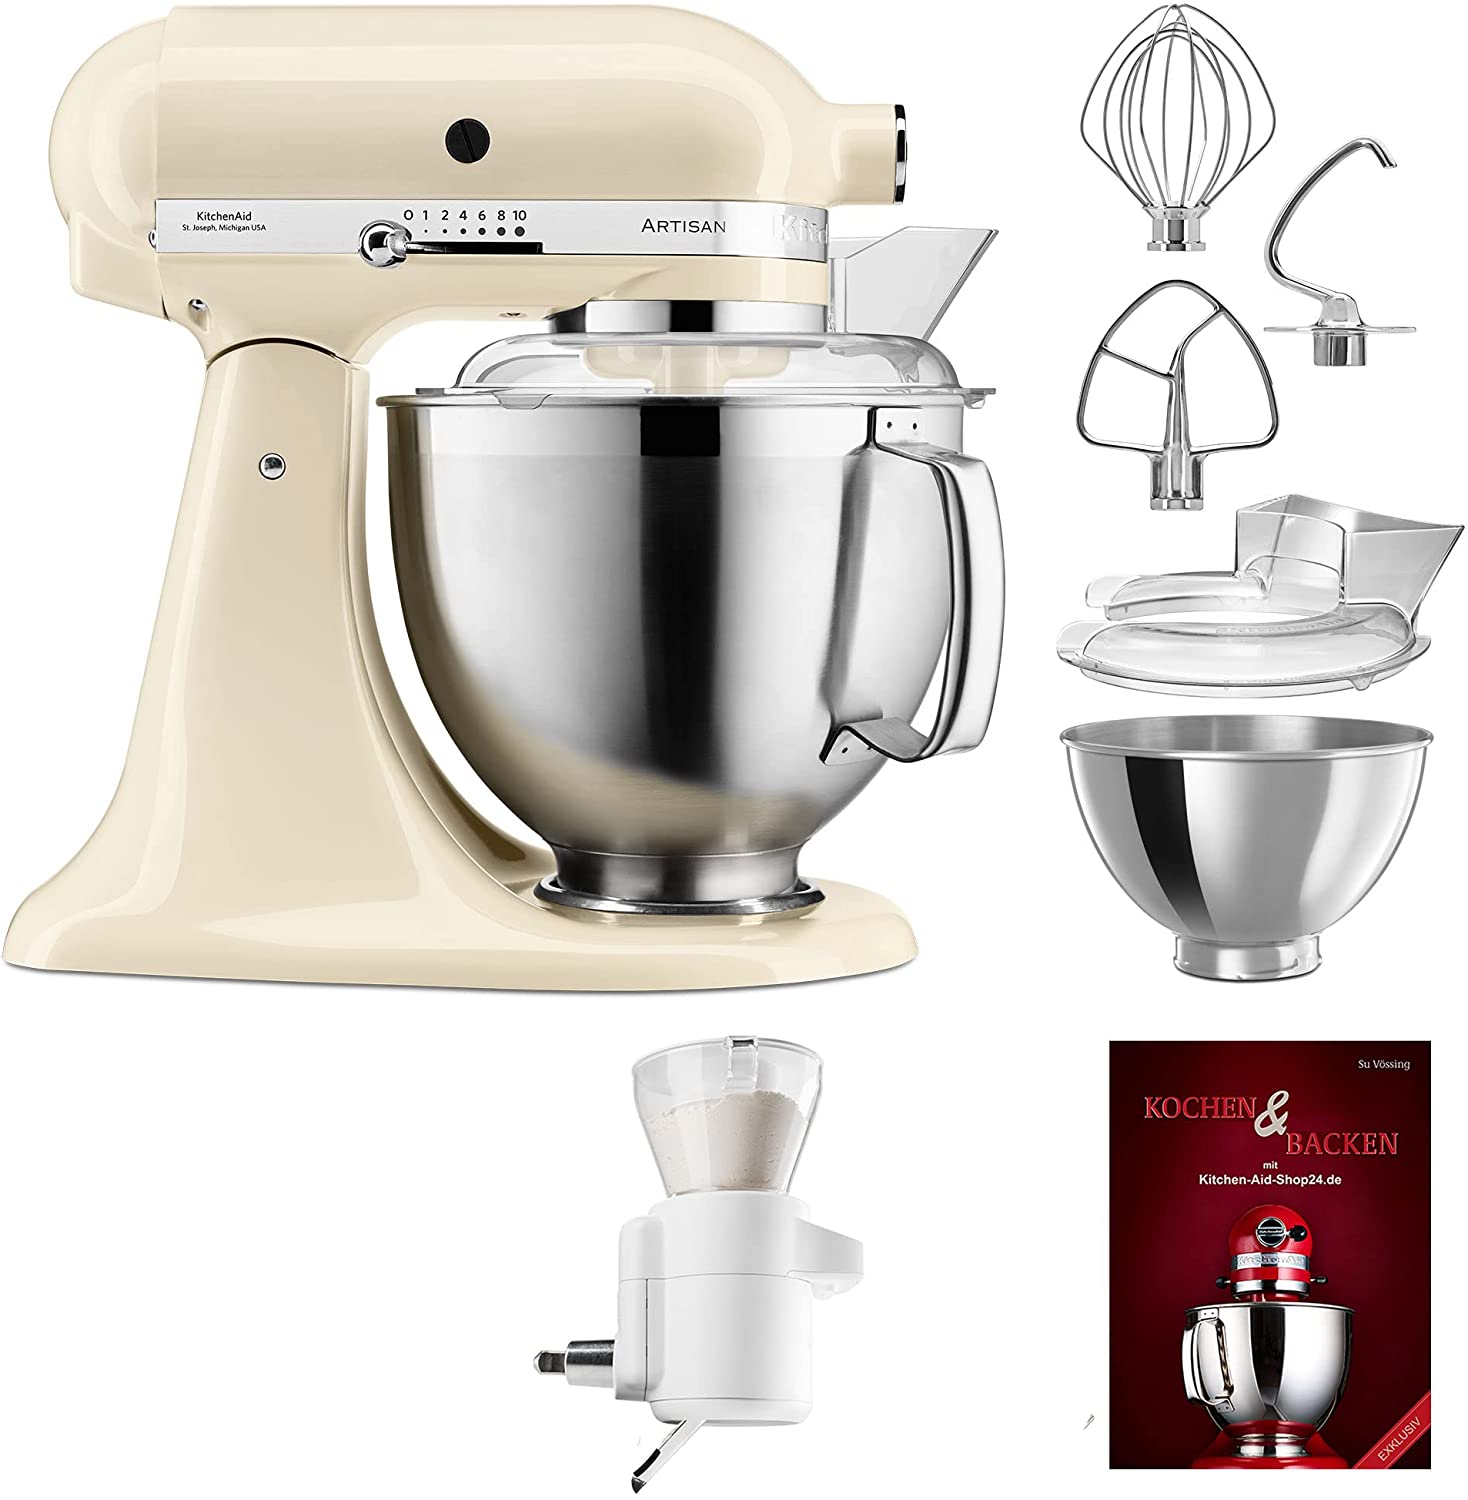 KitchenAid Artisan P26 Food Processor Starter Set 185 (Strainer) - 5KSM185PSEAC Includes Sieve with Digital Scales (5KSMSFTA) and Cookbook (Cooking & Baking)